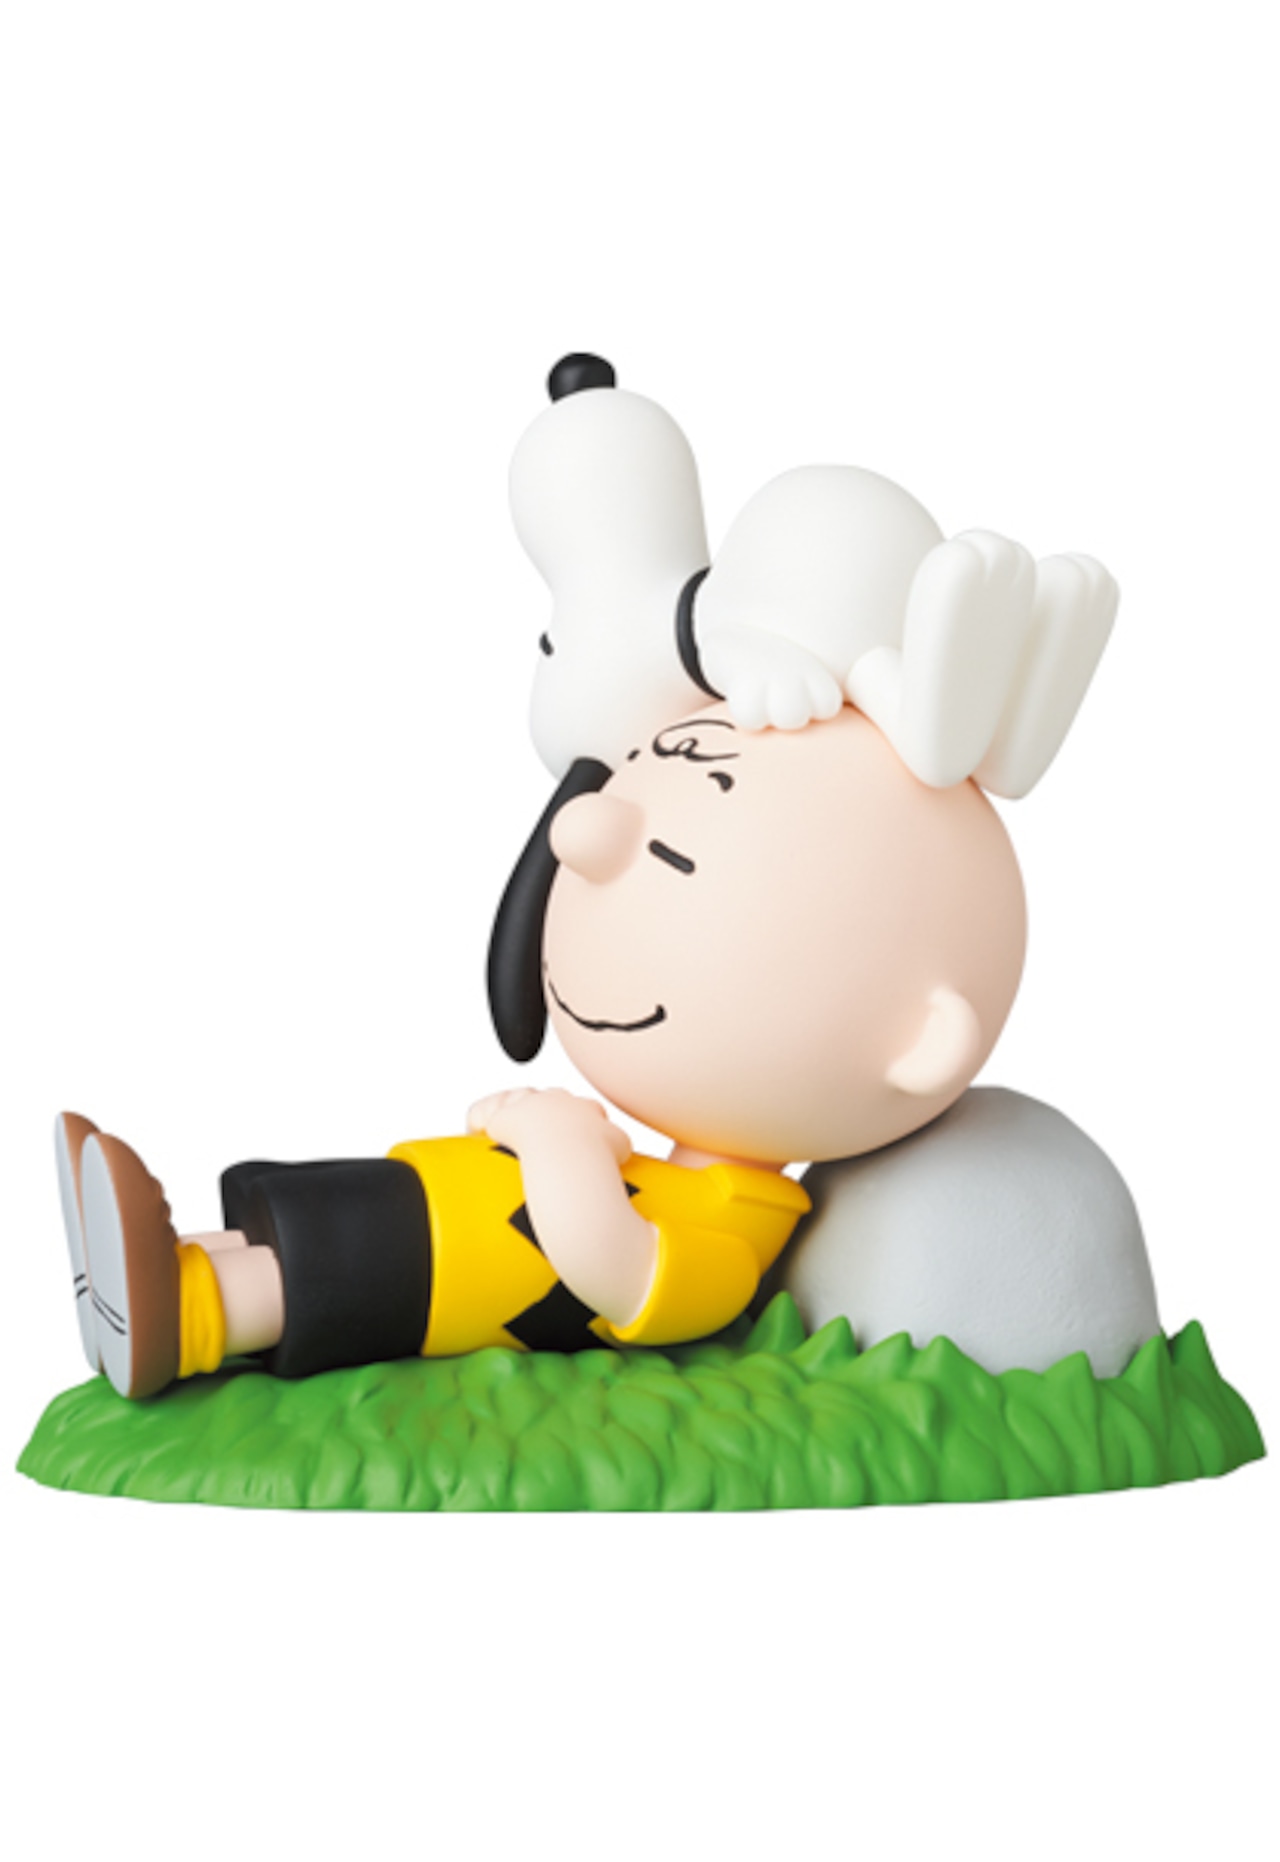 NAPPING CHARLIE BROWN & SNOOPY